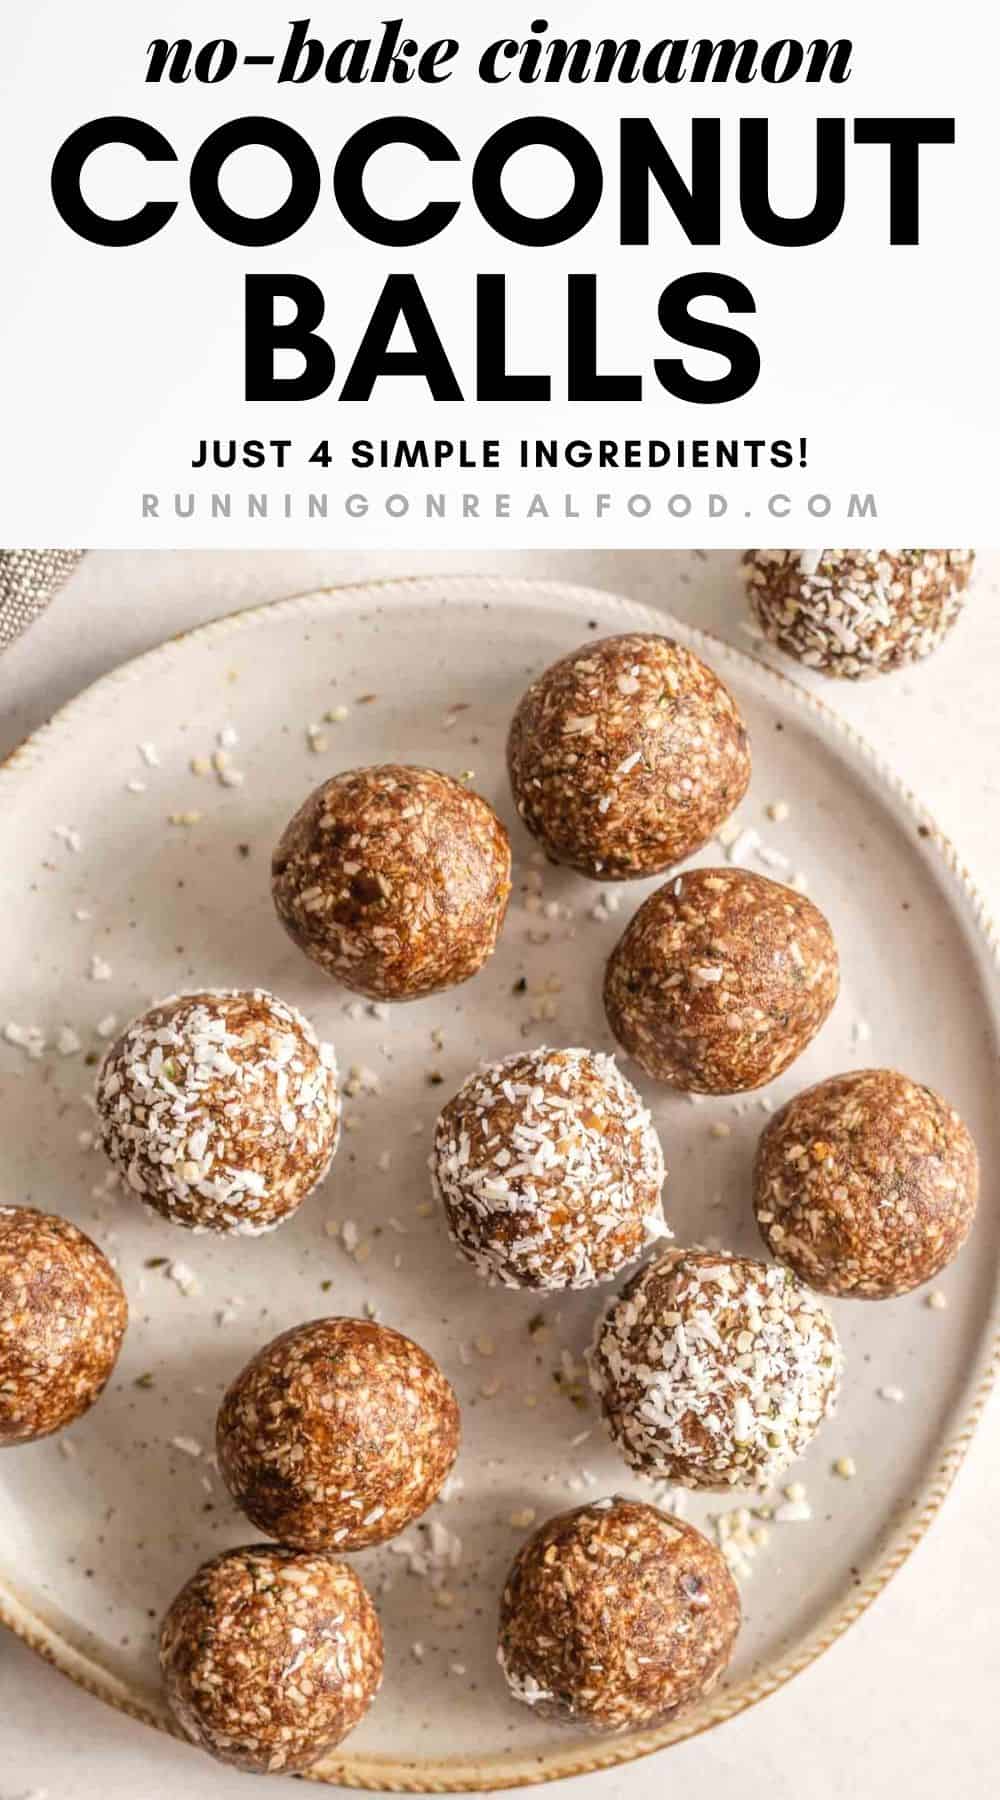 Pinterest graphic with an image and text for cinnamon coconut balls.